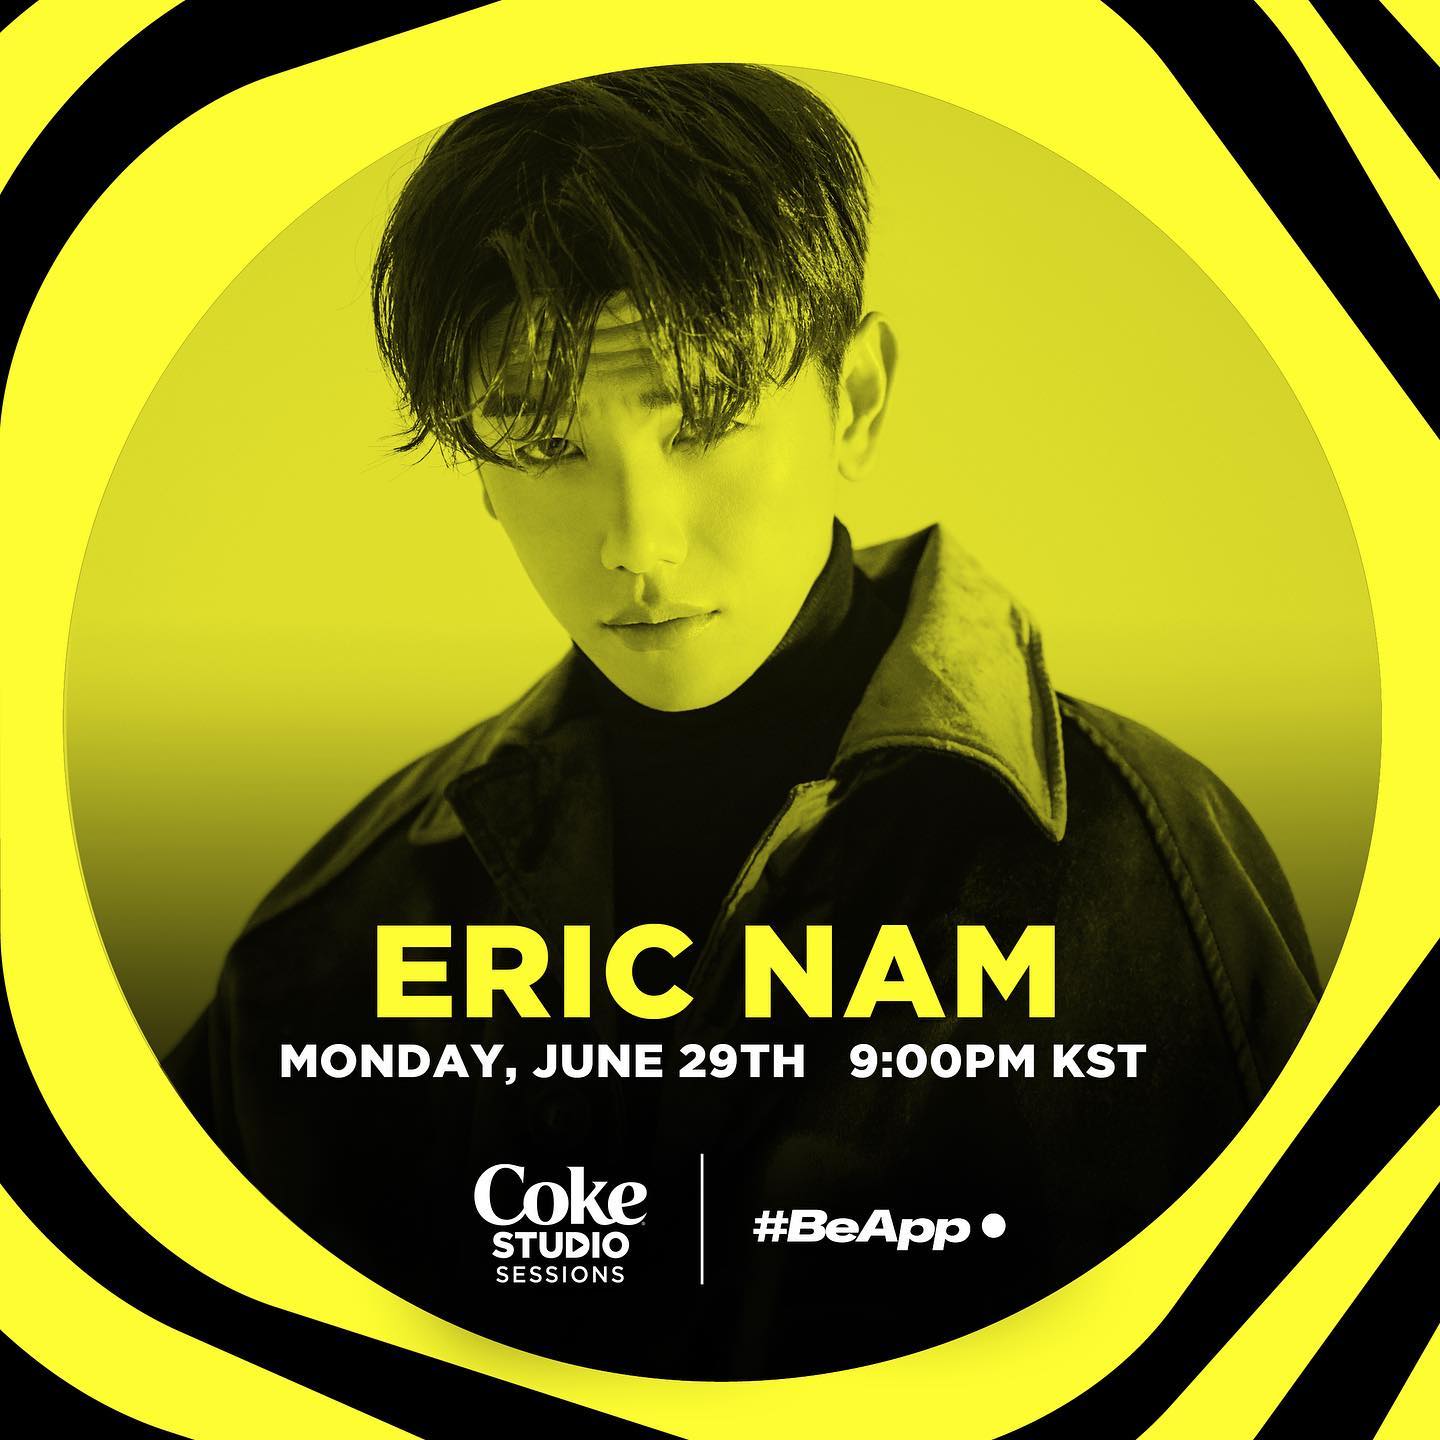 Eric Nam releases mini album 'The Other Side' on the 30th